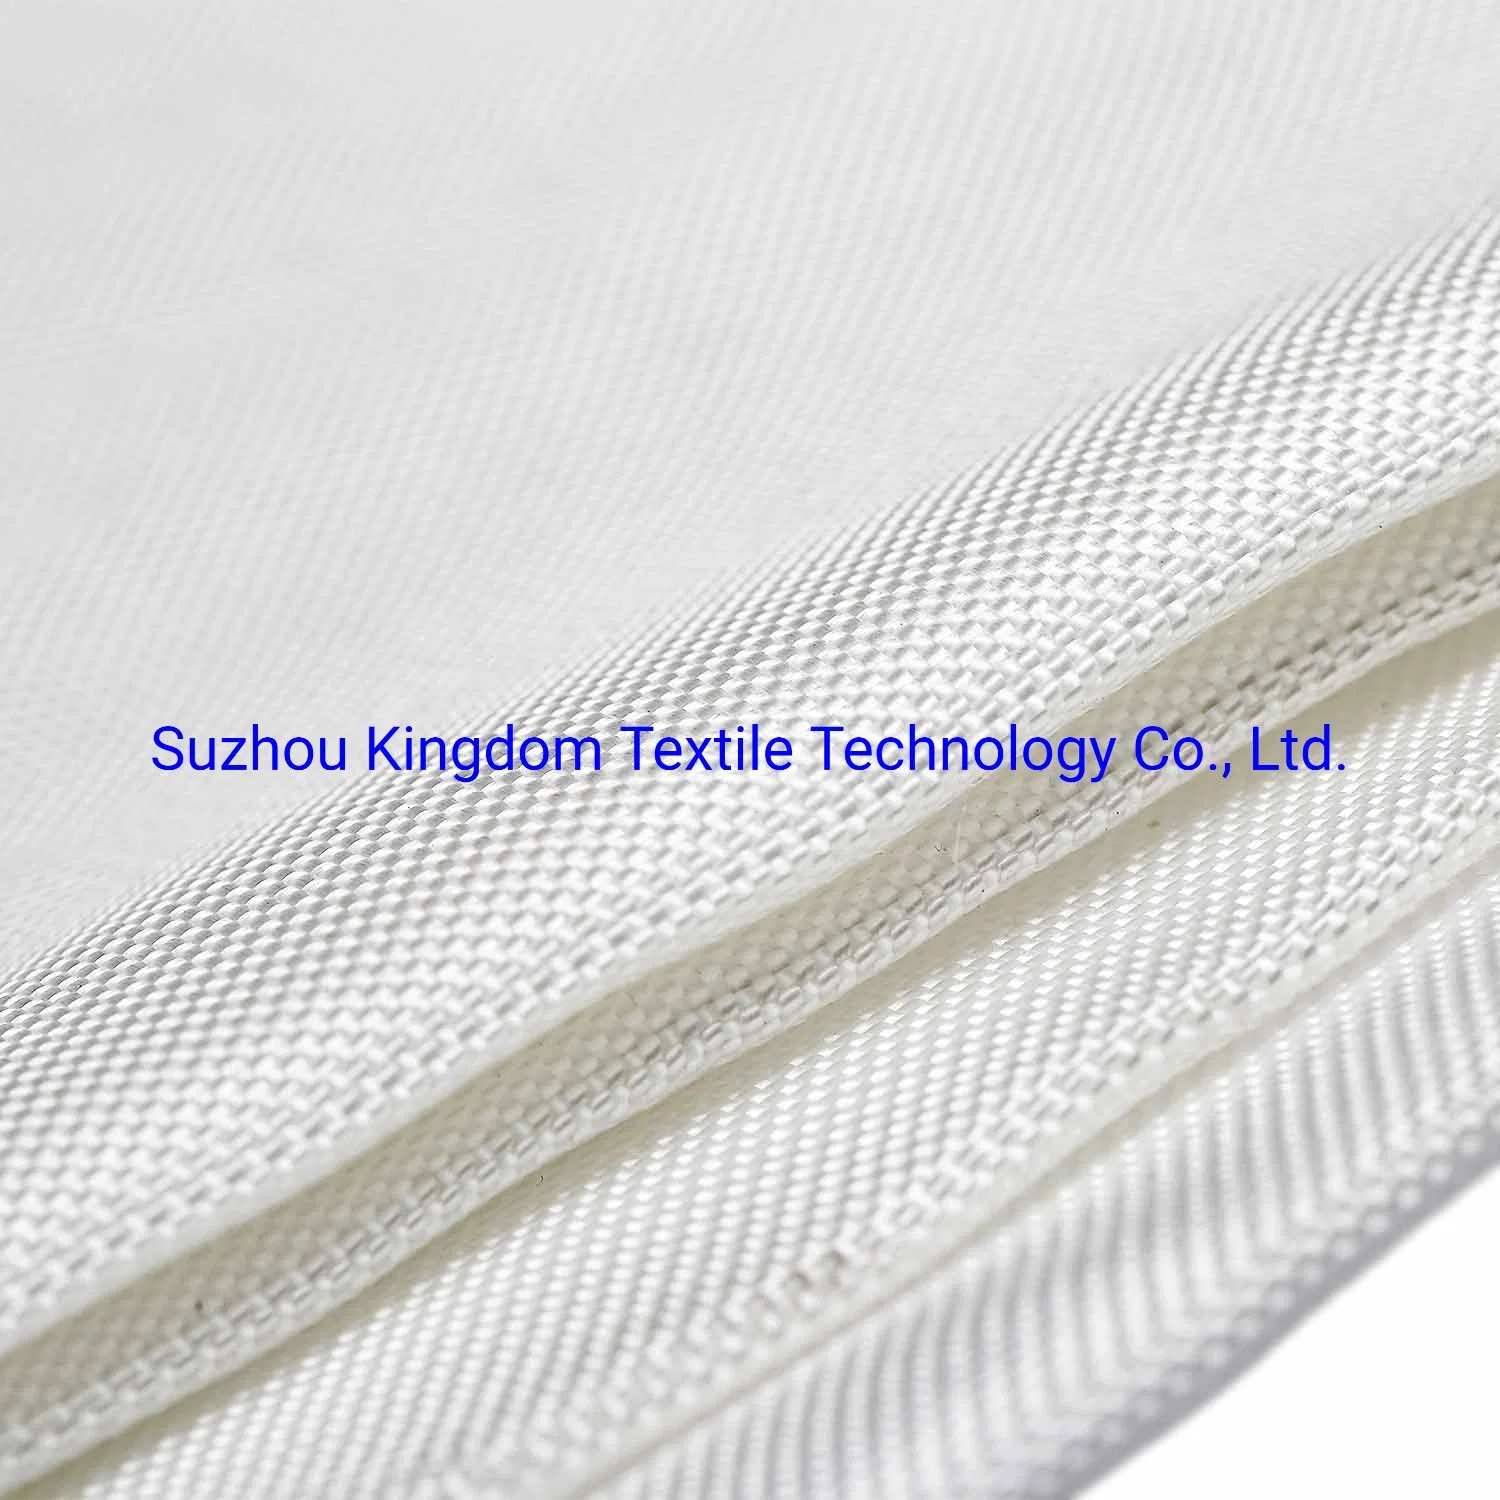 Polyester/Nylon Fabric for PVC Inflatable Material